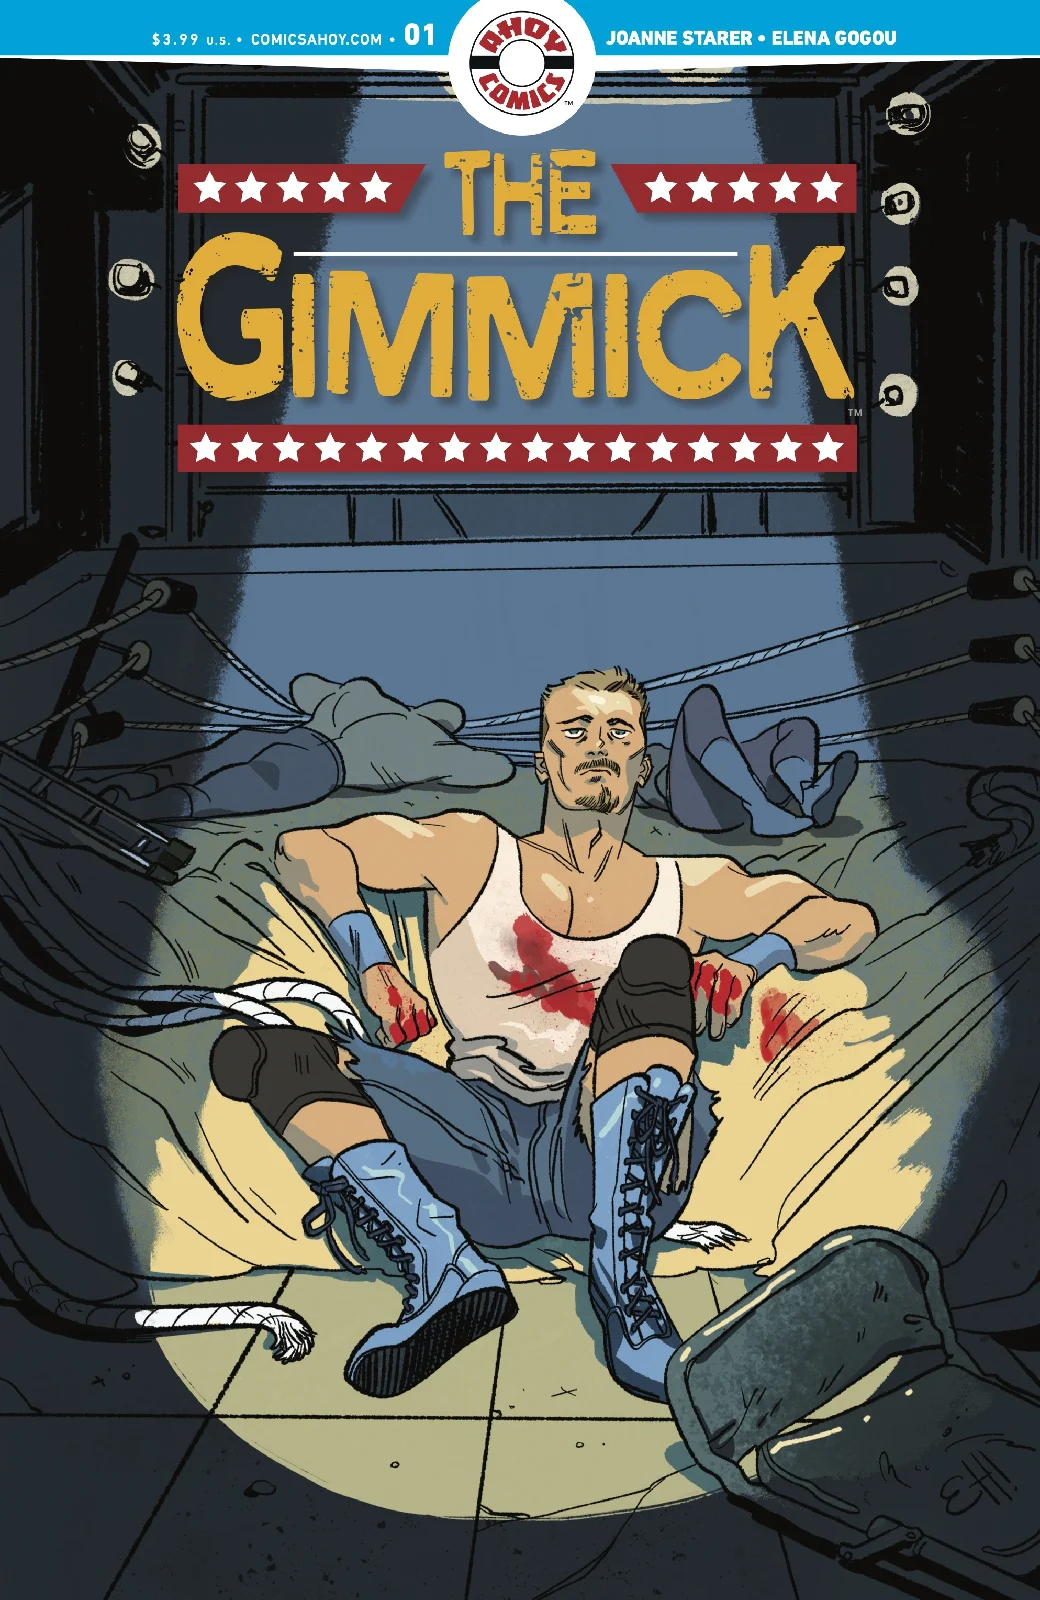 Main newsstand cover for The Gimmick #1